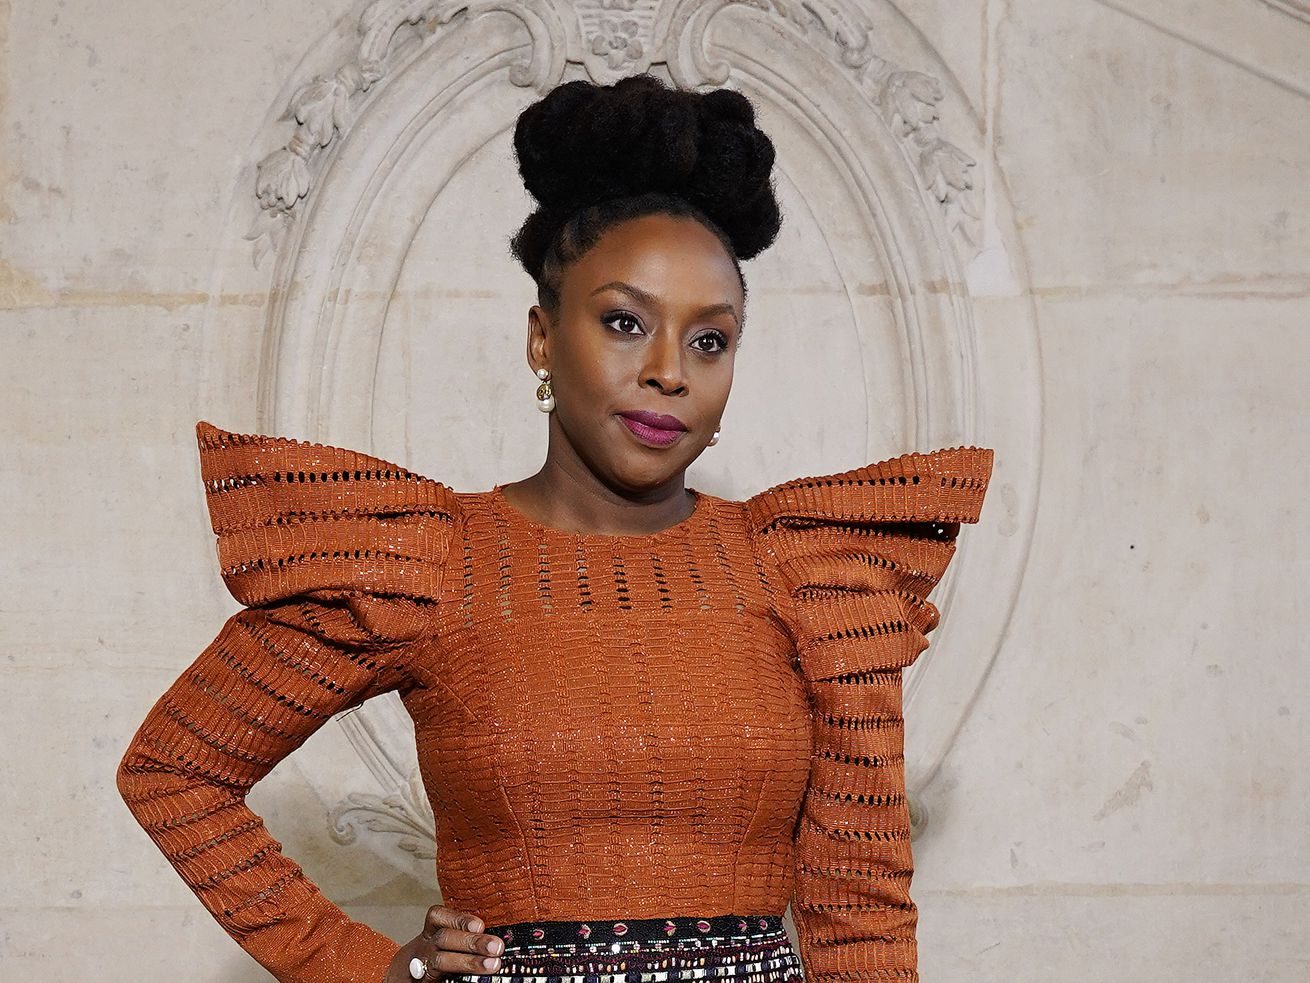 Chimamanda Ngozi Adichie’s cancel culture screed is a dangerous distraction